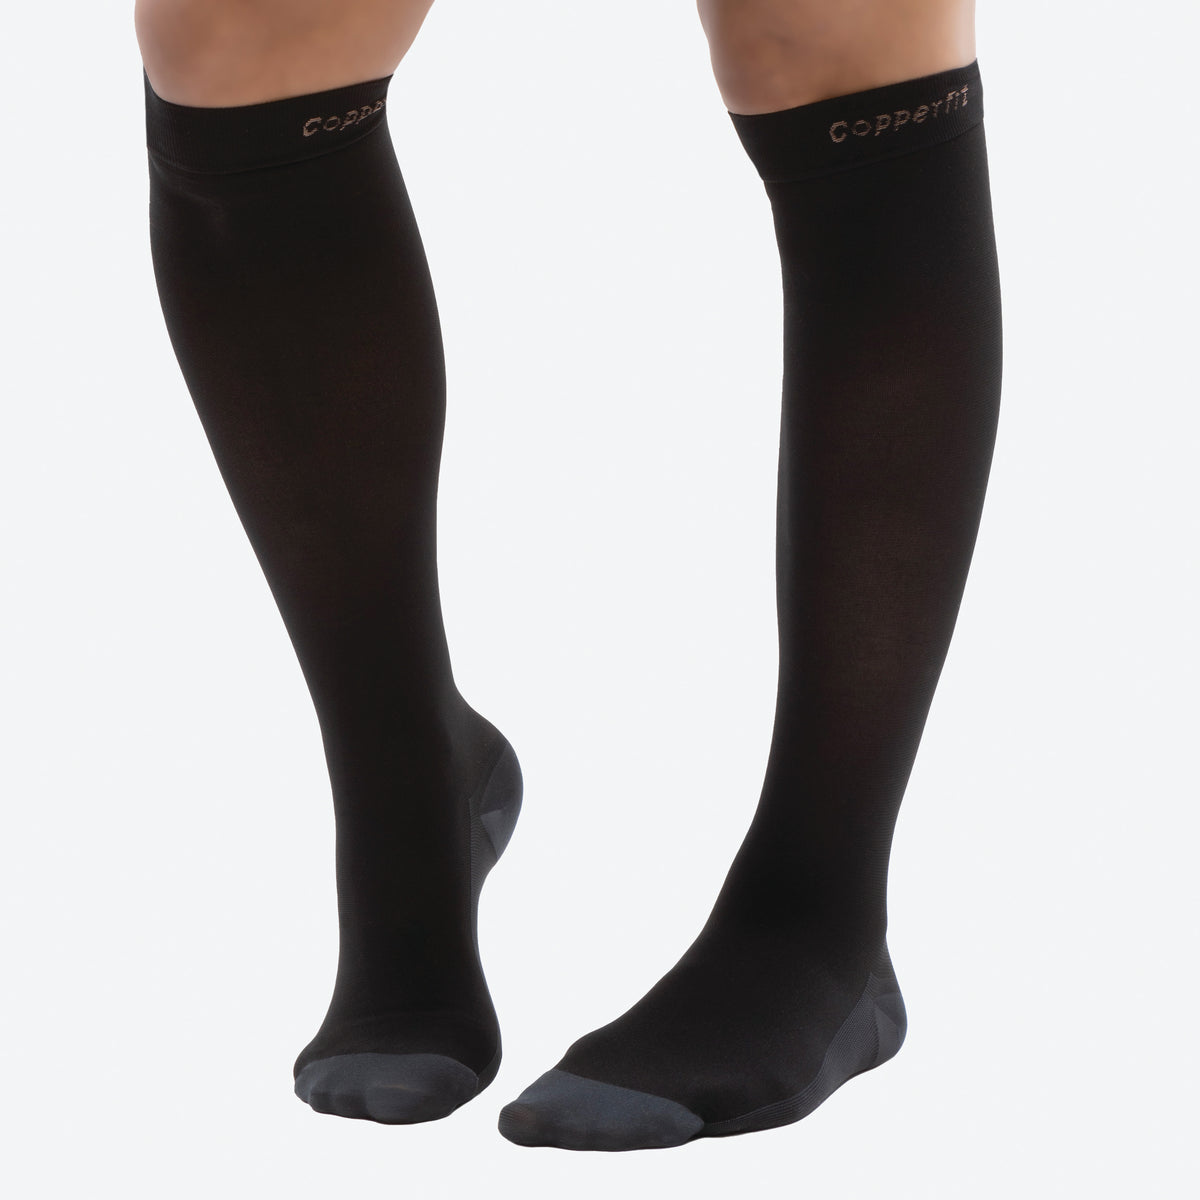 Medical Compression Pantyhose Stockings for Women Men - Plus Size